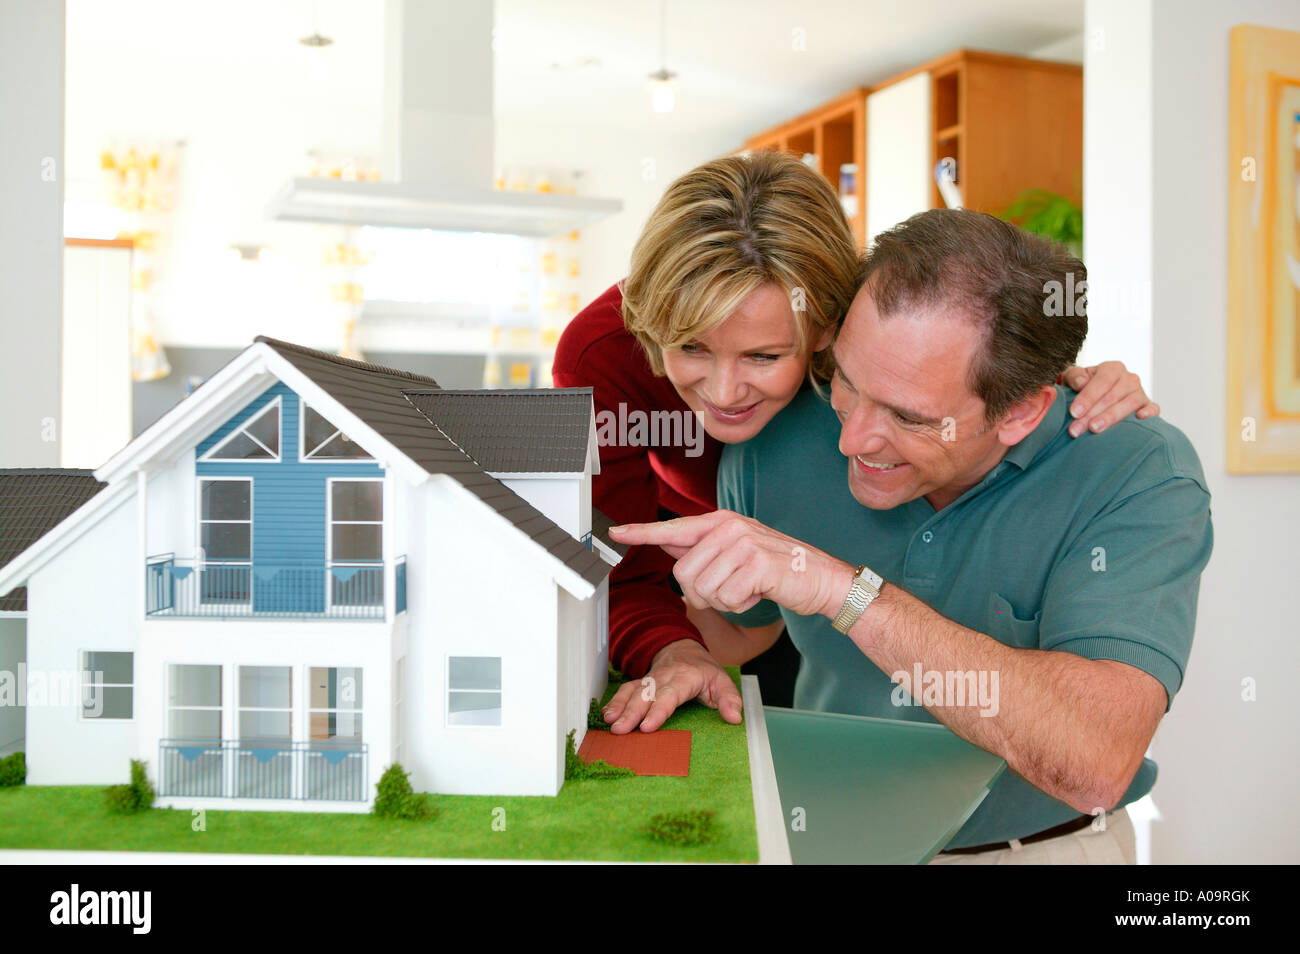 Paar mit einem Modellhaus, couple with house model Stock Photo